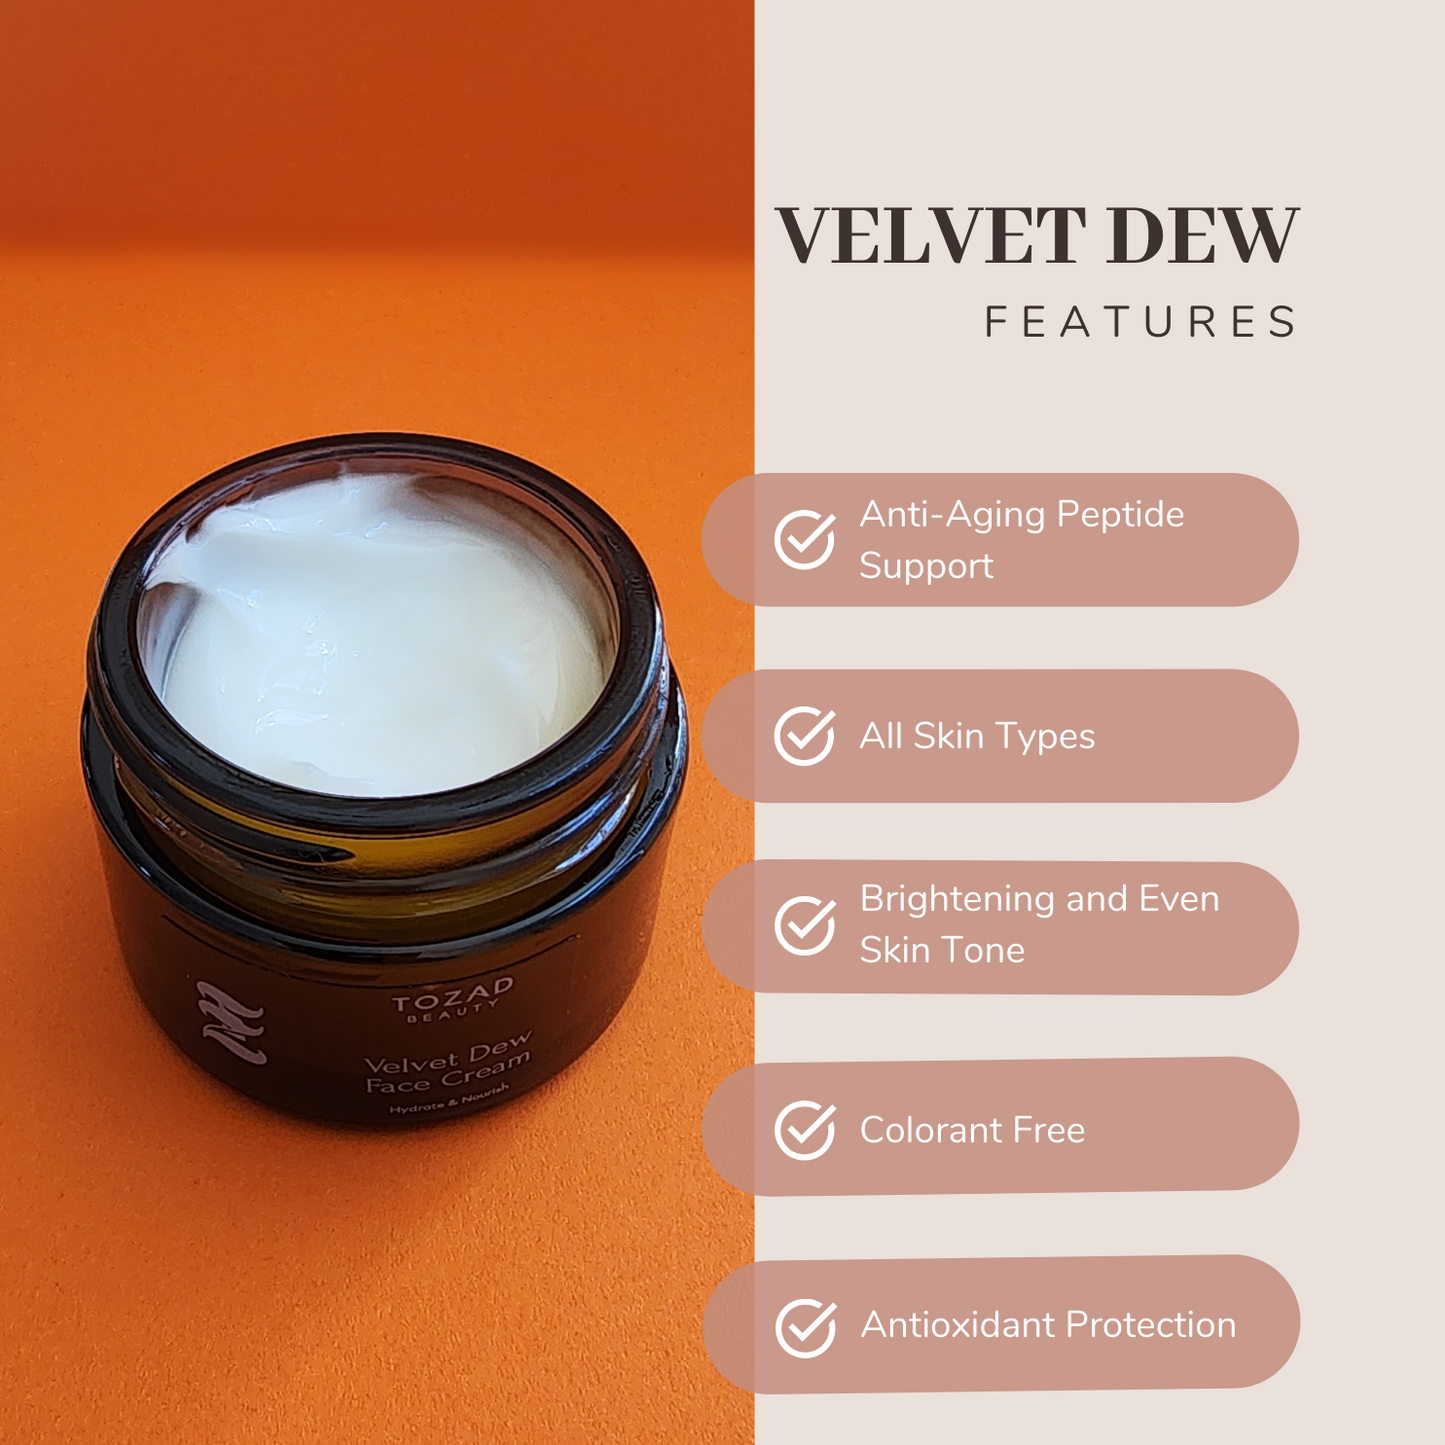 Velvet Dew Daily Repair, Hydrating, Firming and Brightening Cream with Fermented Black Rice Extract, Peptide Complex, Red Algae & Tranexamic Acid, 1.7 FL Oz